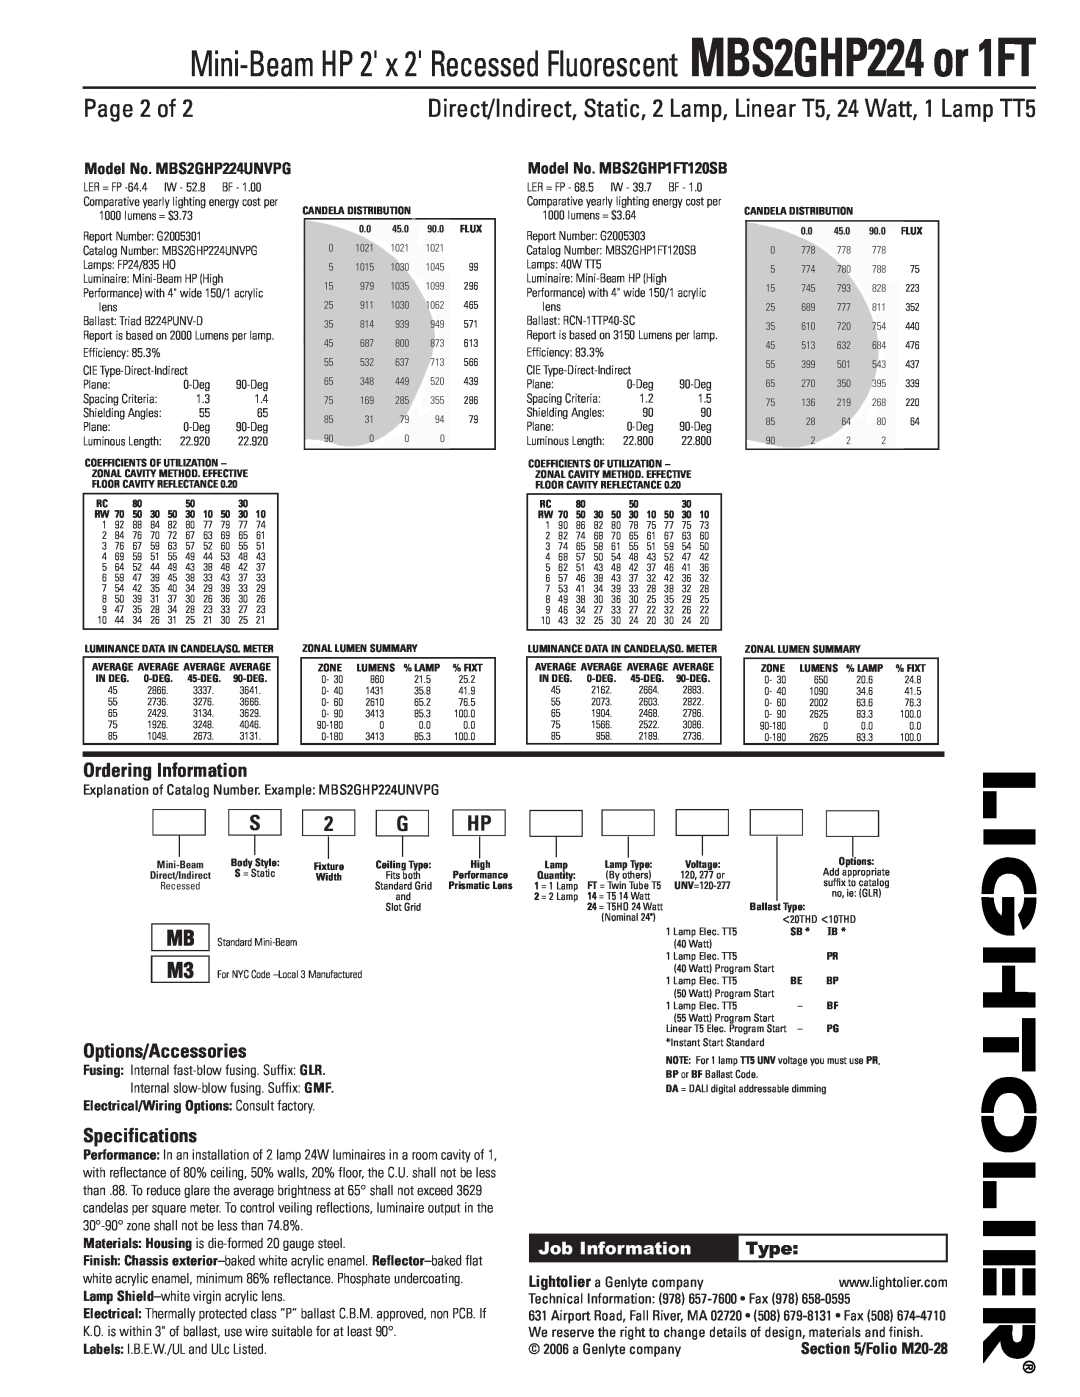 Lightolier MBS2GHP1FT Page 2 of, Ordering Information, Options/Accessories, Specifications, Job Information, Type 